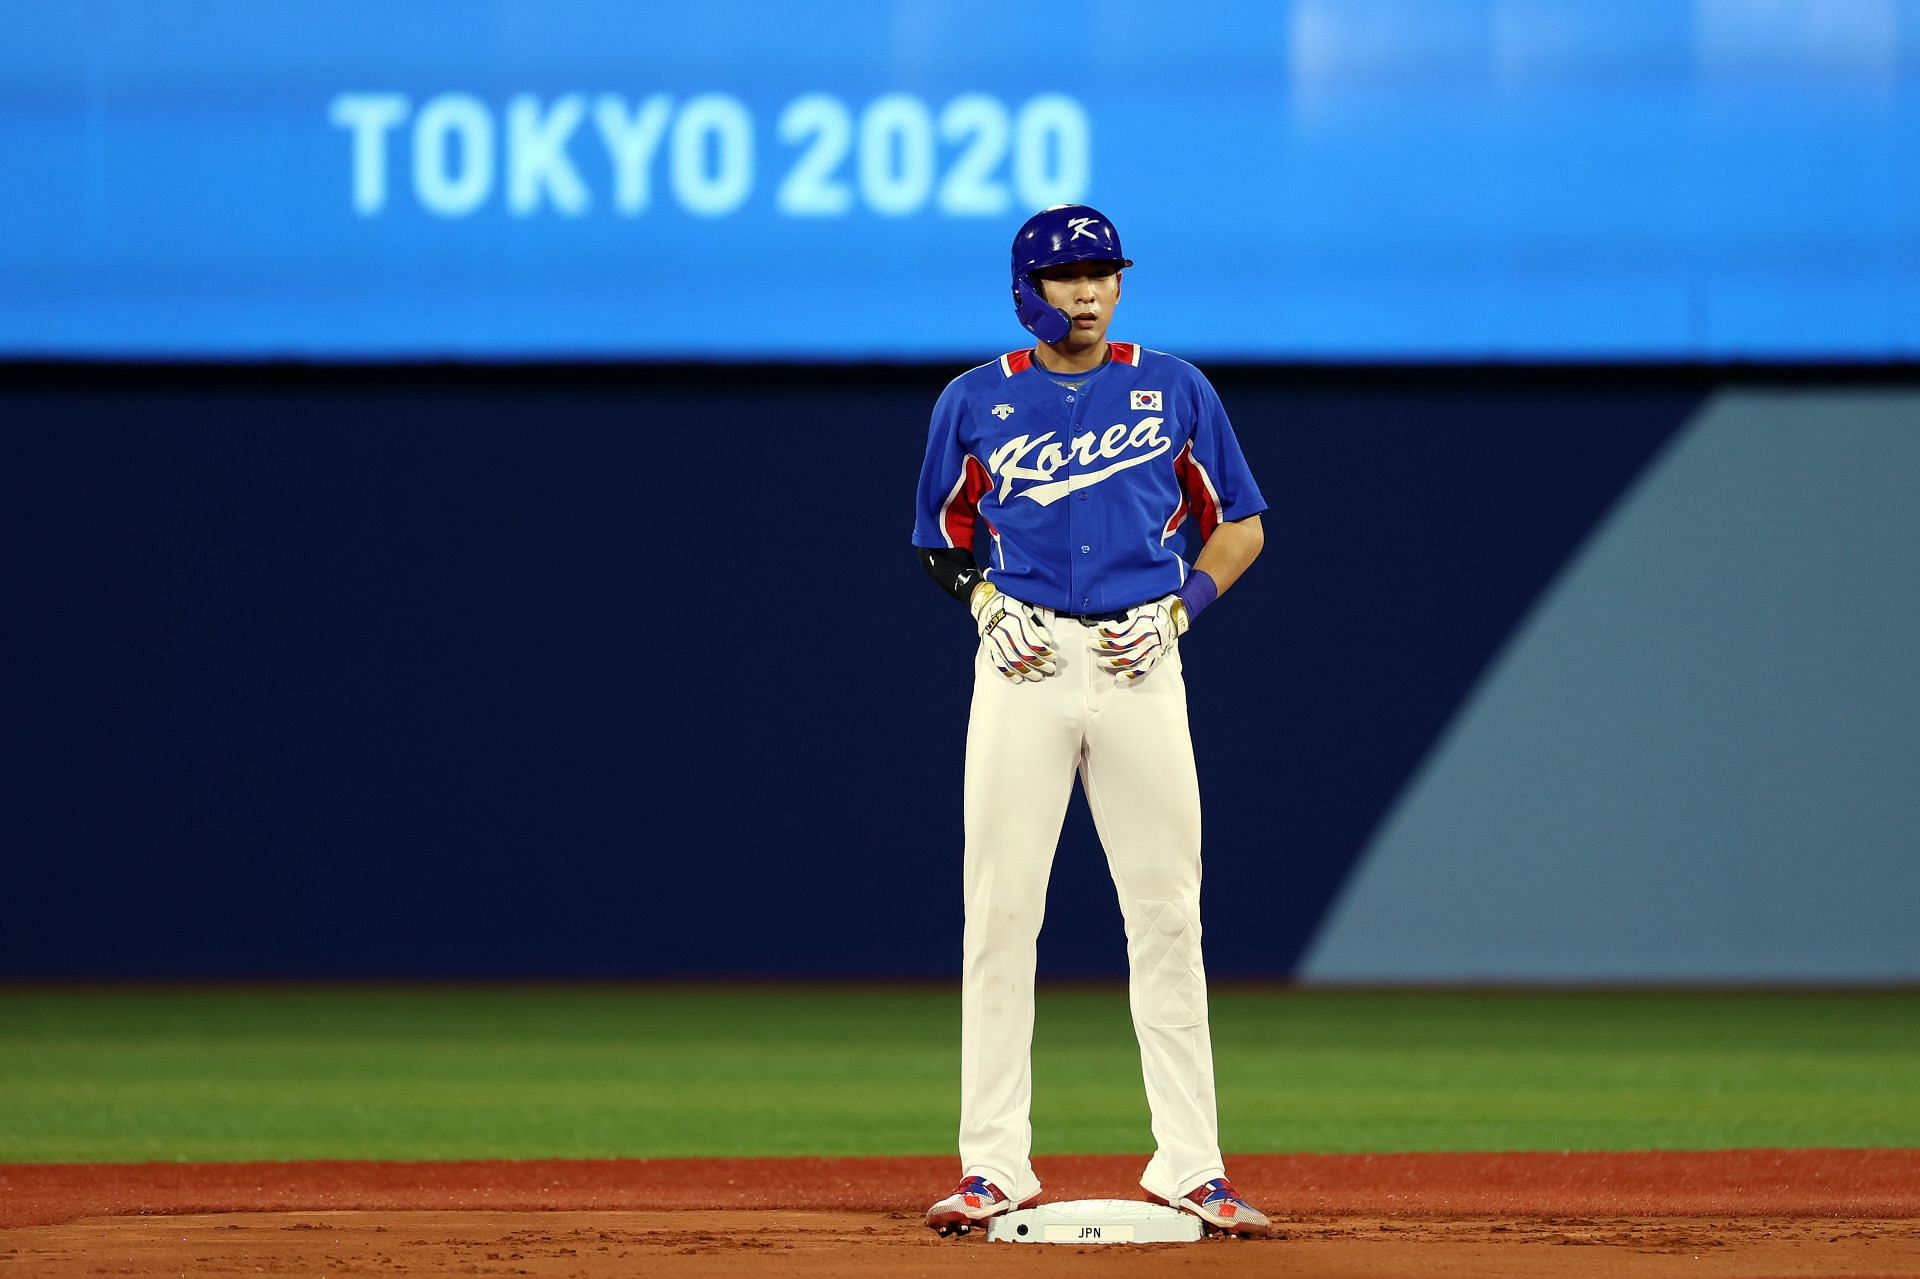 Jung-hoo Lee set to be posted after 2023 season